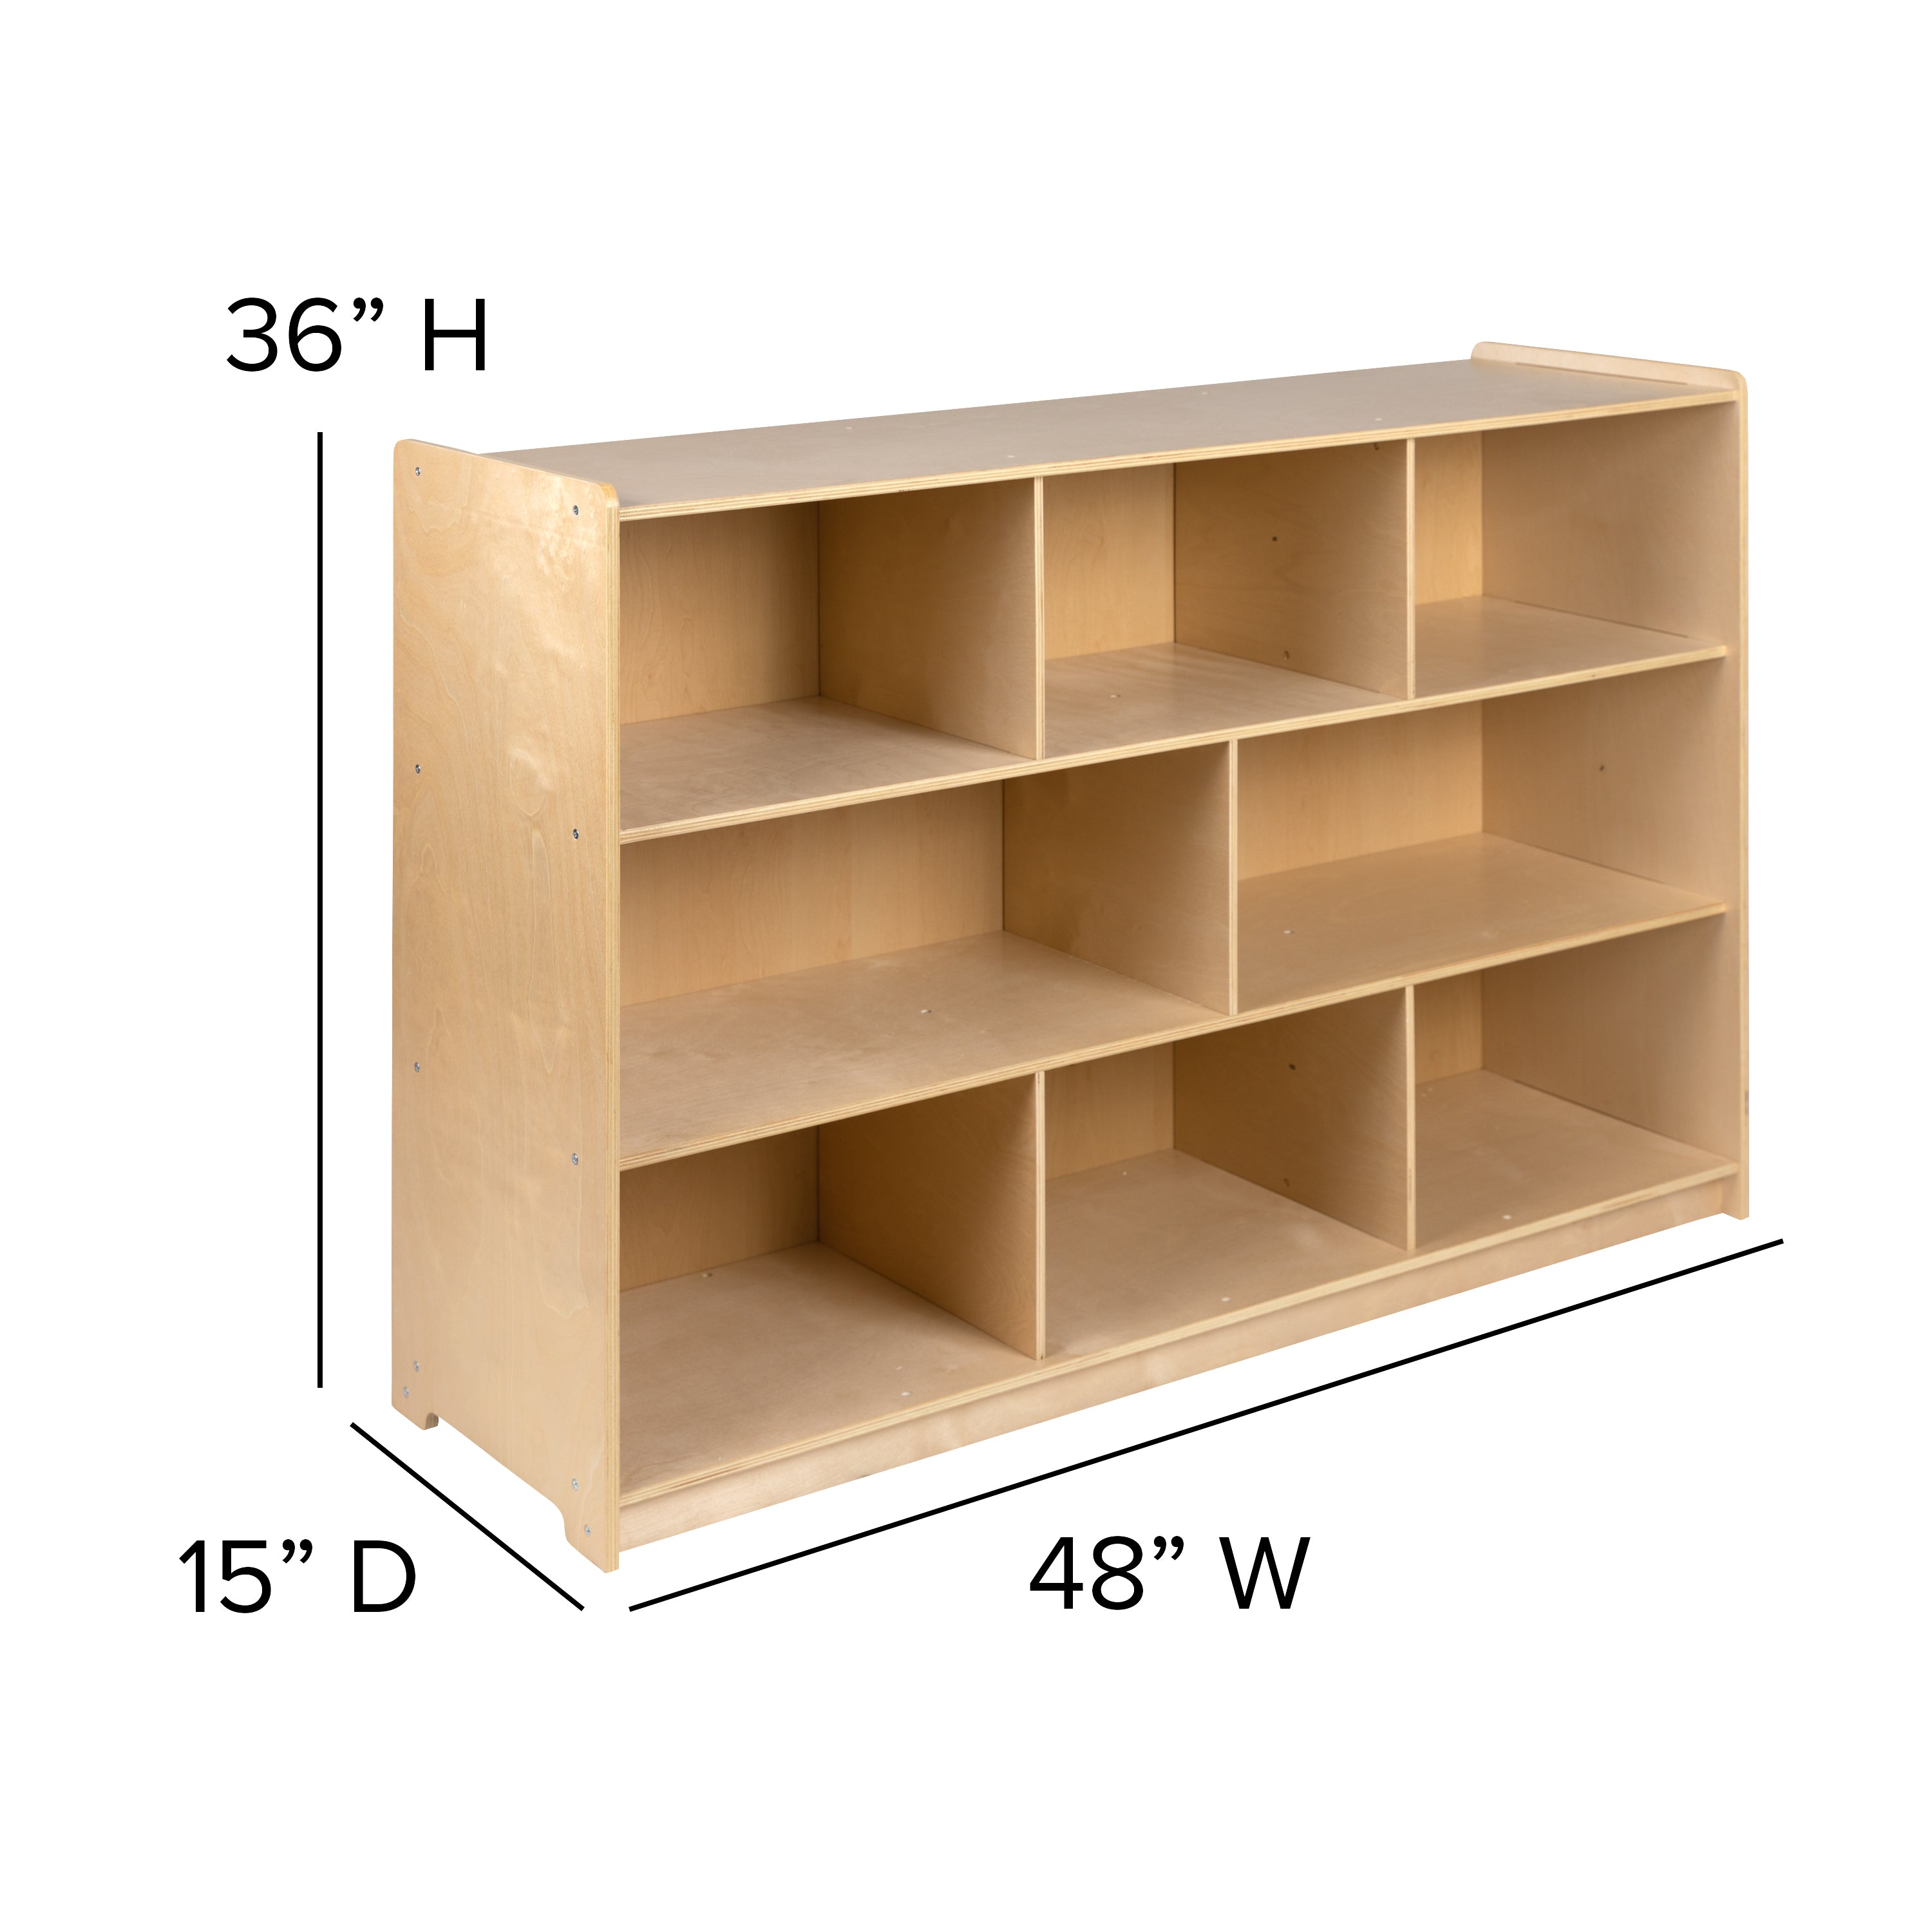 Wooden School Classroom Storage Cabinet/Cubby for Commercial or Home Use - Safe, Kid Friendly Design (Natural)-Classroom Storage-Flash Furniture-Wall2Wall Furnishings